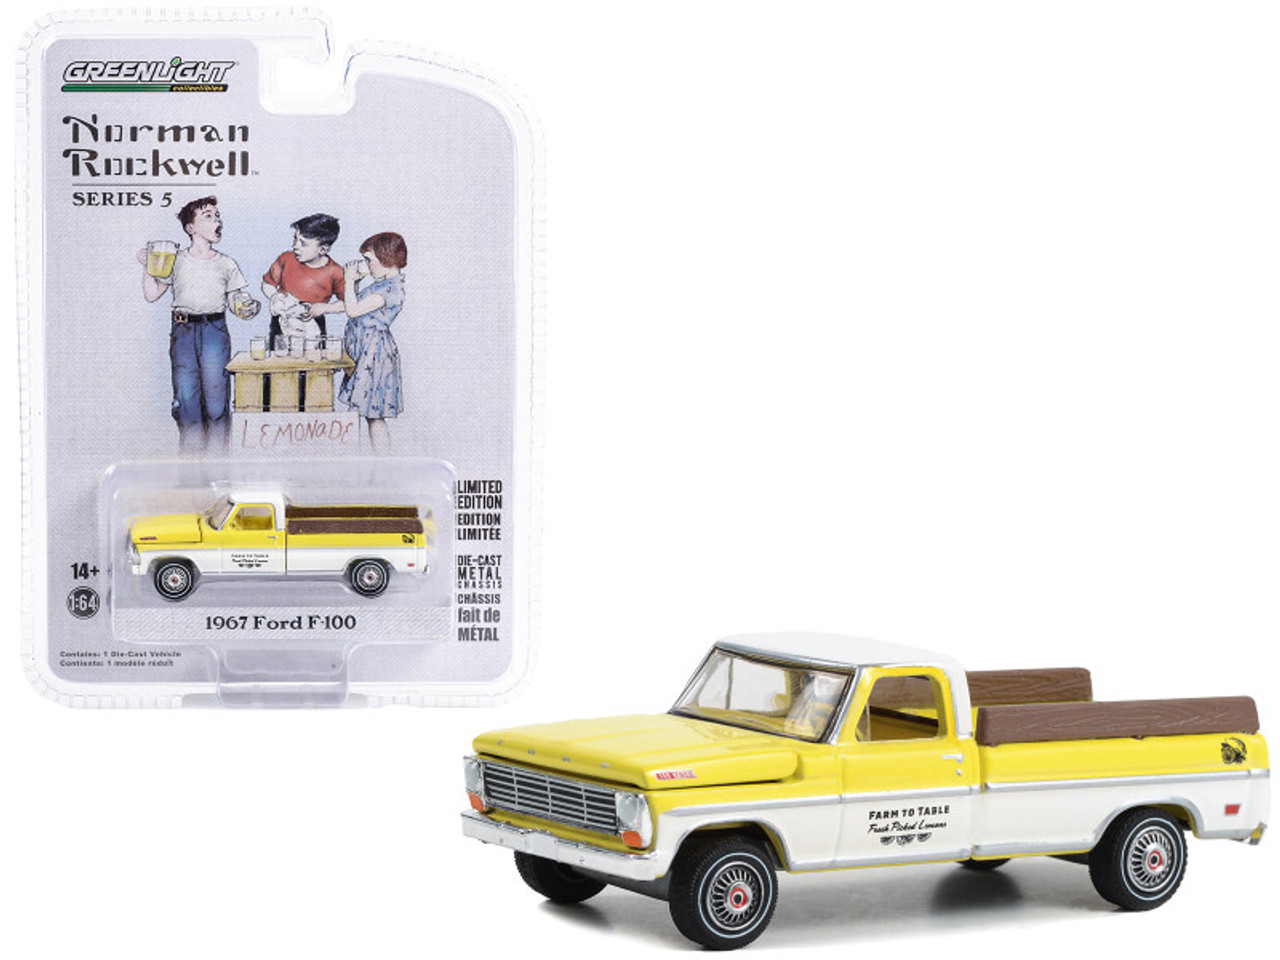 1967 Ford F-100 Pickup Truck Yellow and White with Yellow Interior "Farm to Table Fresh Picked Lemons" "Norman Rockwell" Series 5 1/64 Diecast Model Car by Greenlight